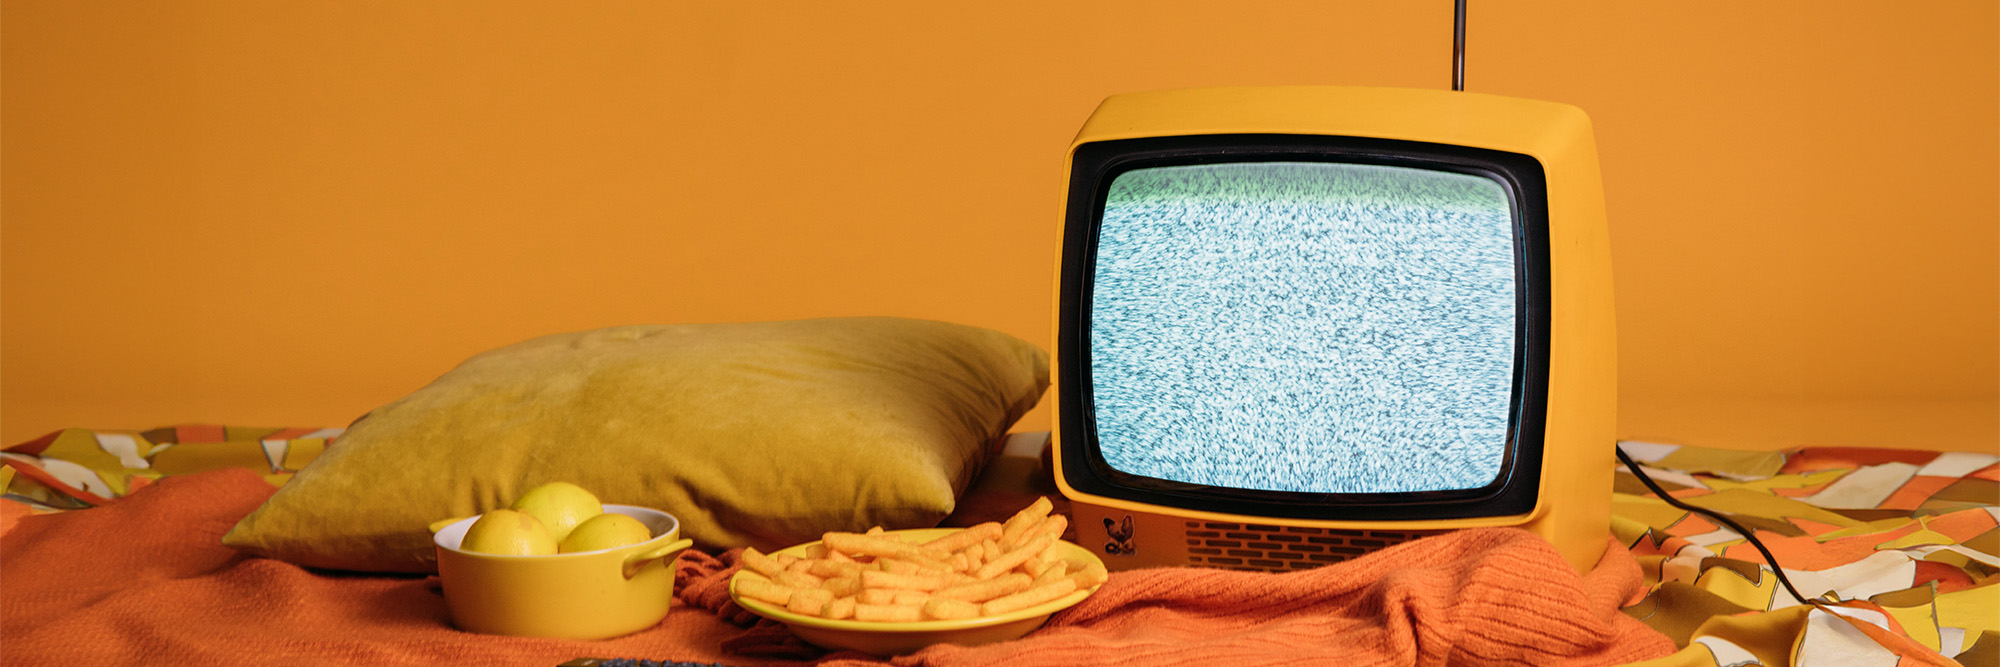 Tv With Blank Scree And Food On Bed